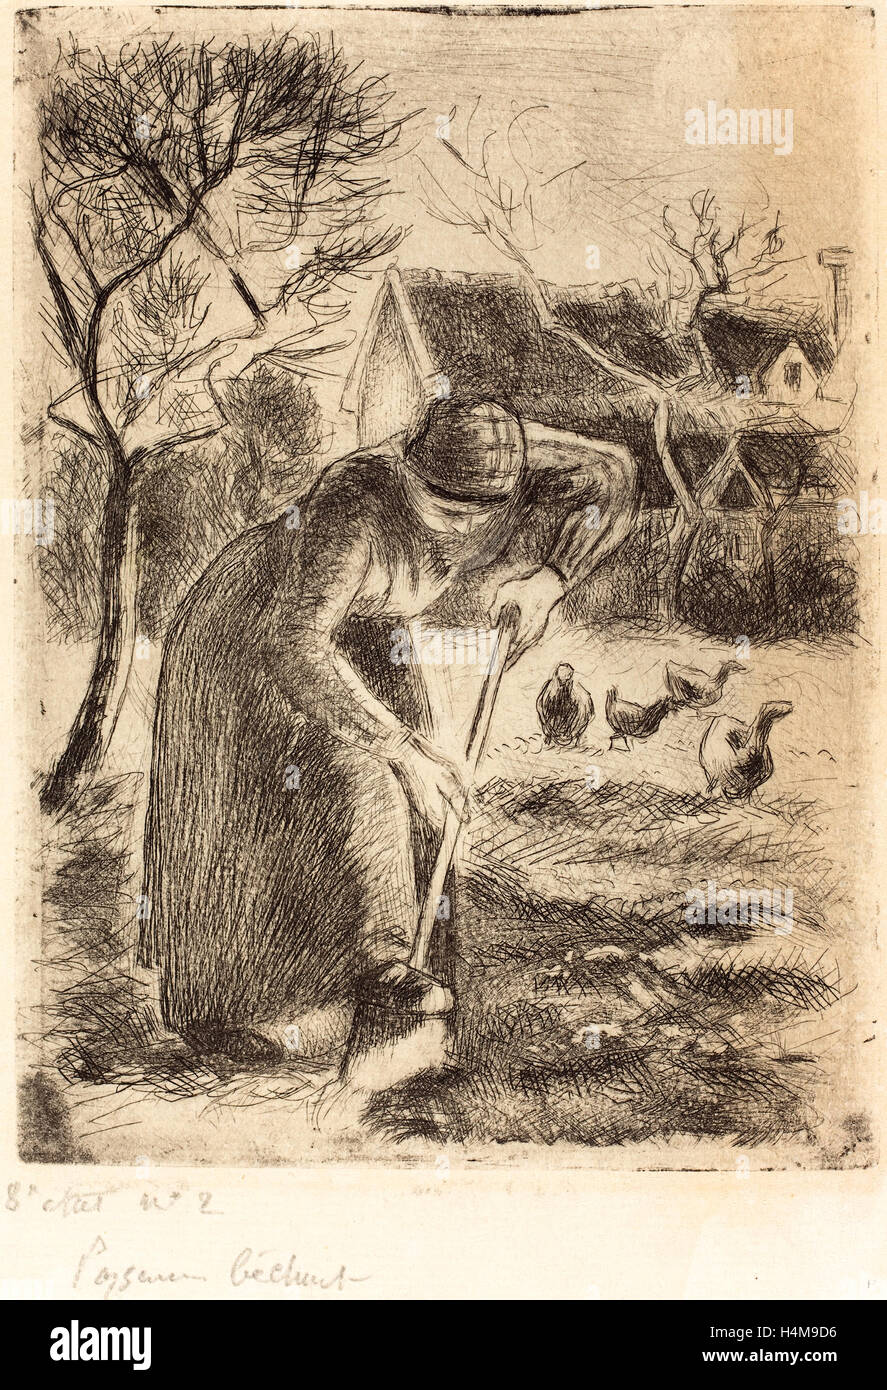 Camille Pissarro, French (1830-1903), Paysanne bêchant (Peasant Laboring), 1890, etching and aquatint in black Stock Photo